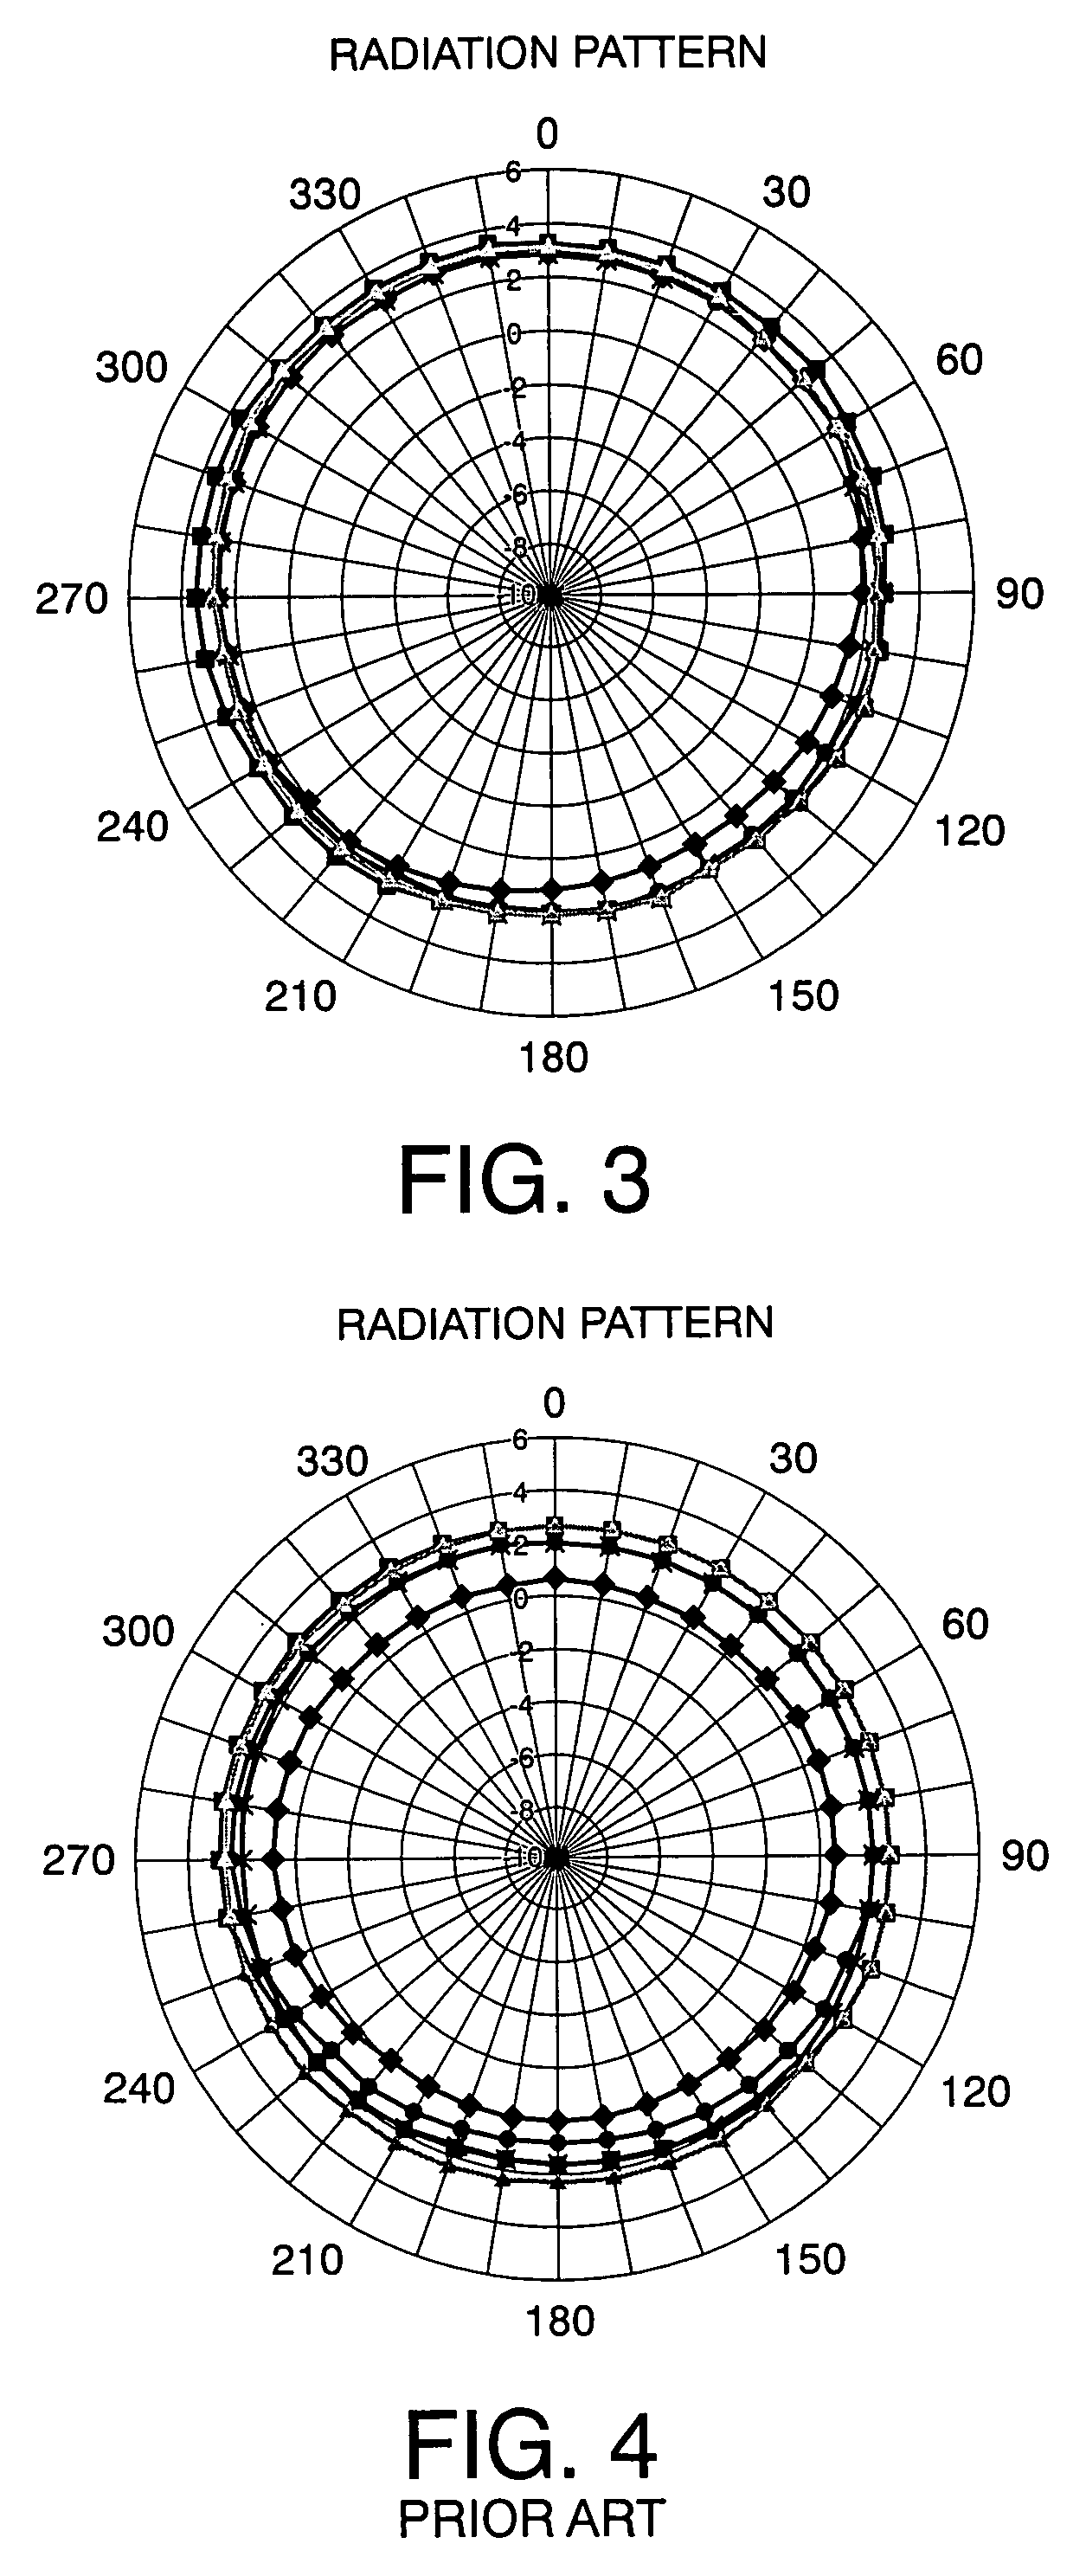 Patch antenna having a non-feeding element formed on a side surface of a dielectric